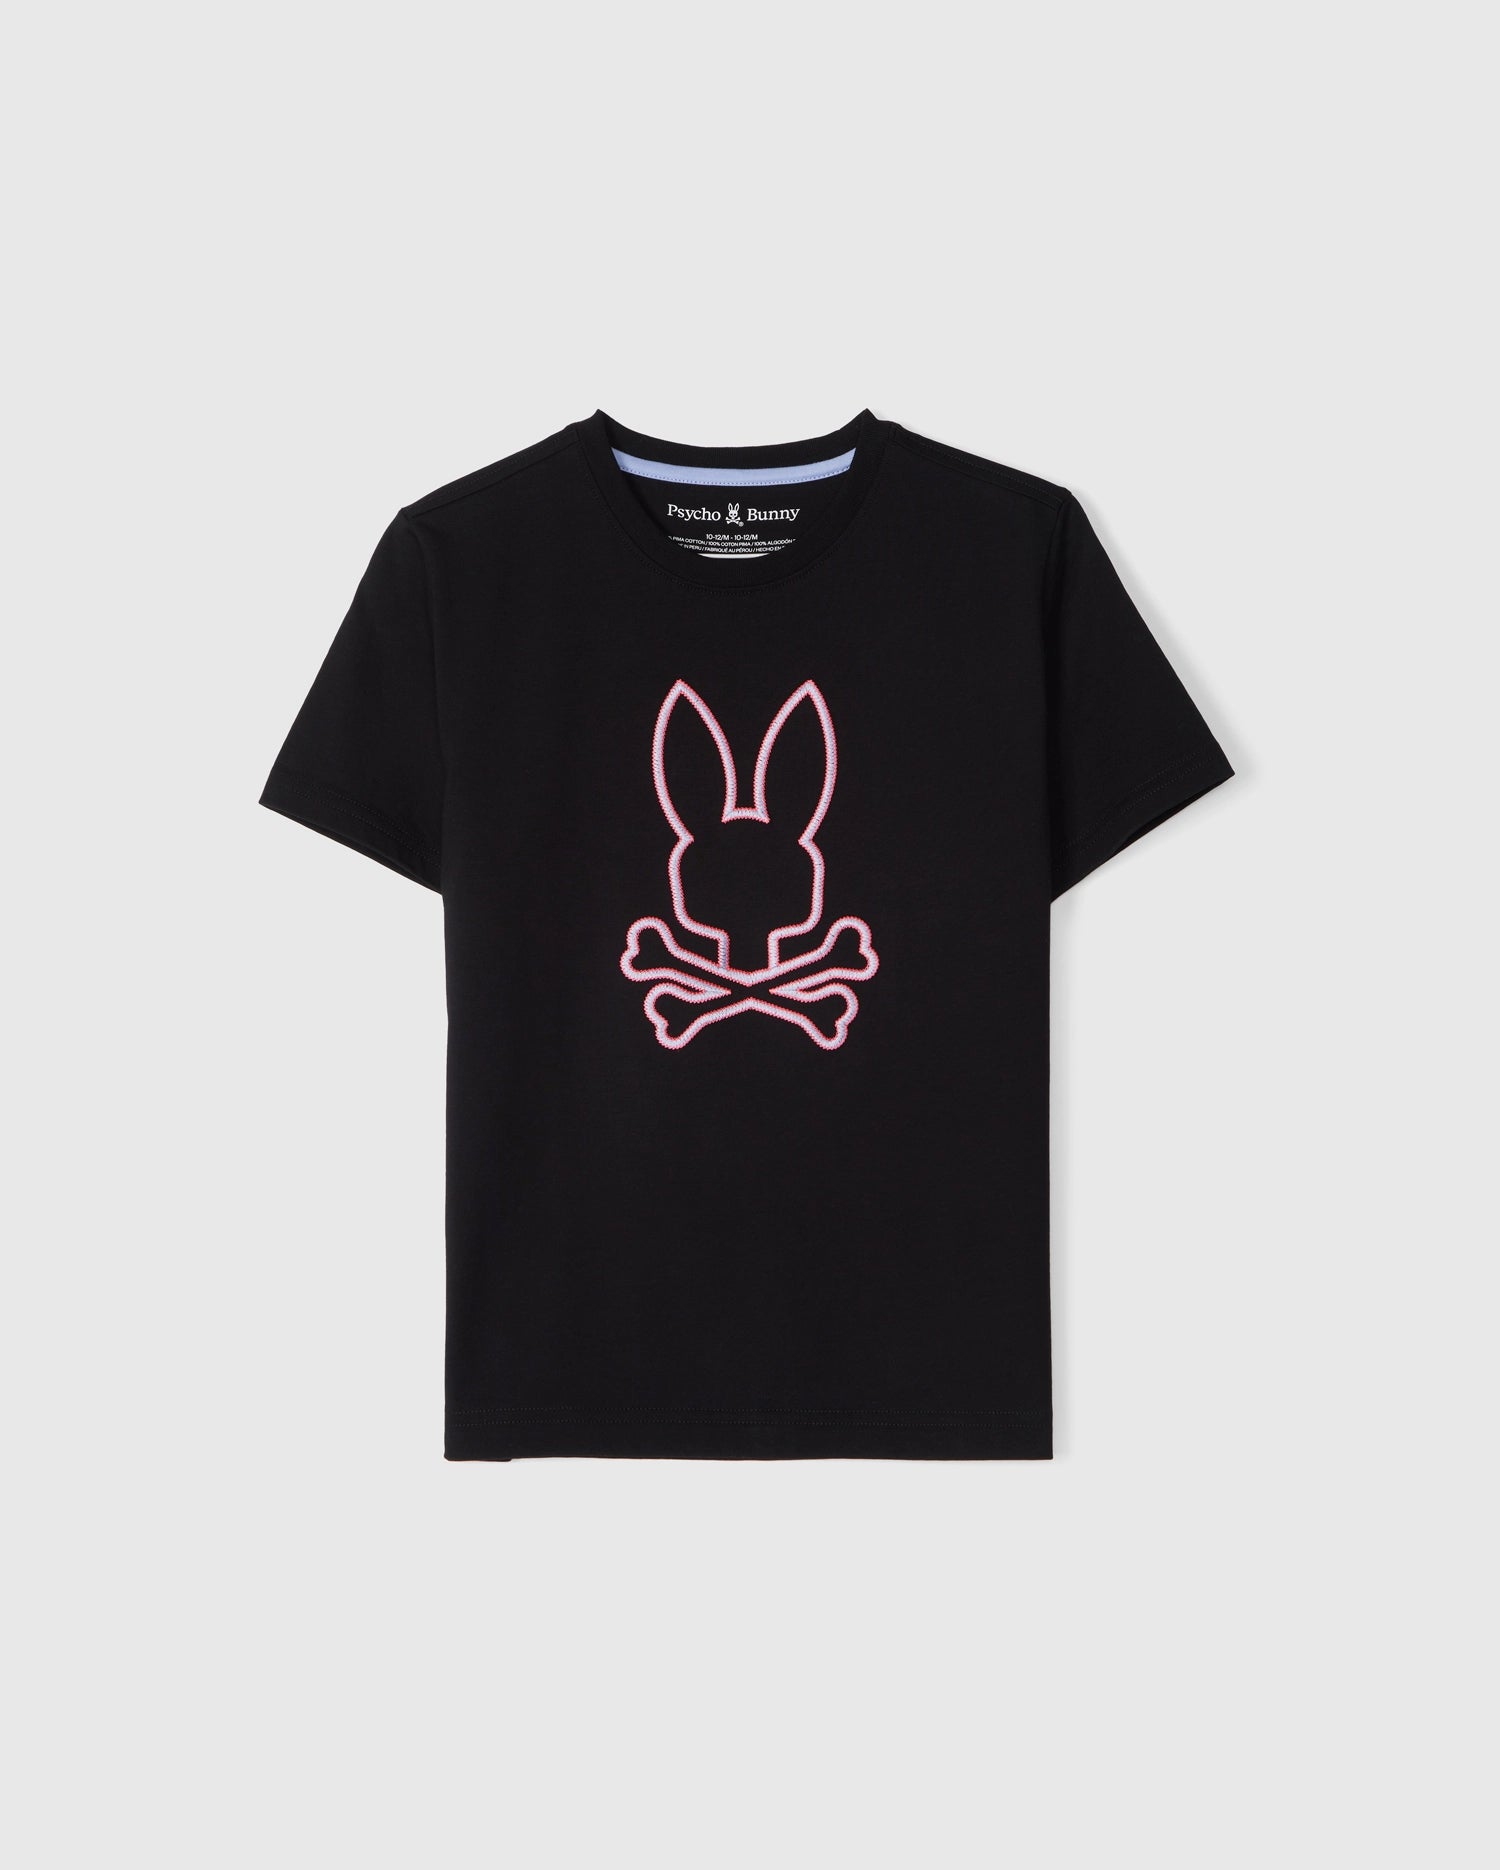 A black Psycho Bunny KIDS FLOYD GRAPHIC TEE - B0U338B2TS features a neon pink bunny head with long ears above two crossing bones, offering a playful twist on the traditional skull and crossbones design. The shirt is laid flat on a plain white background.